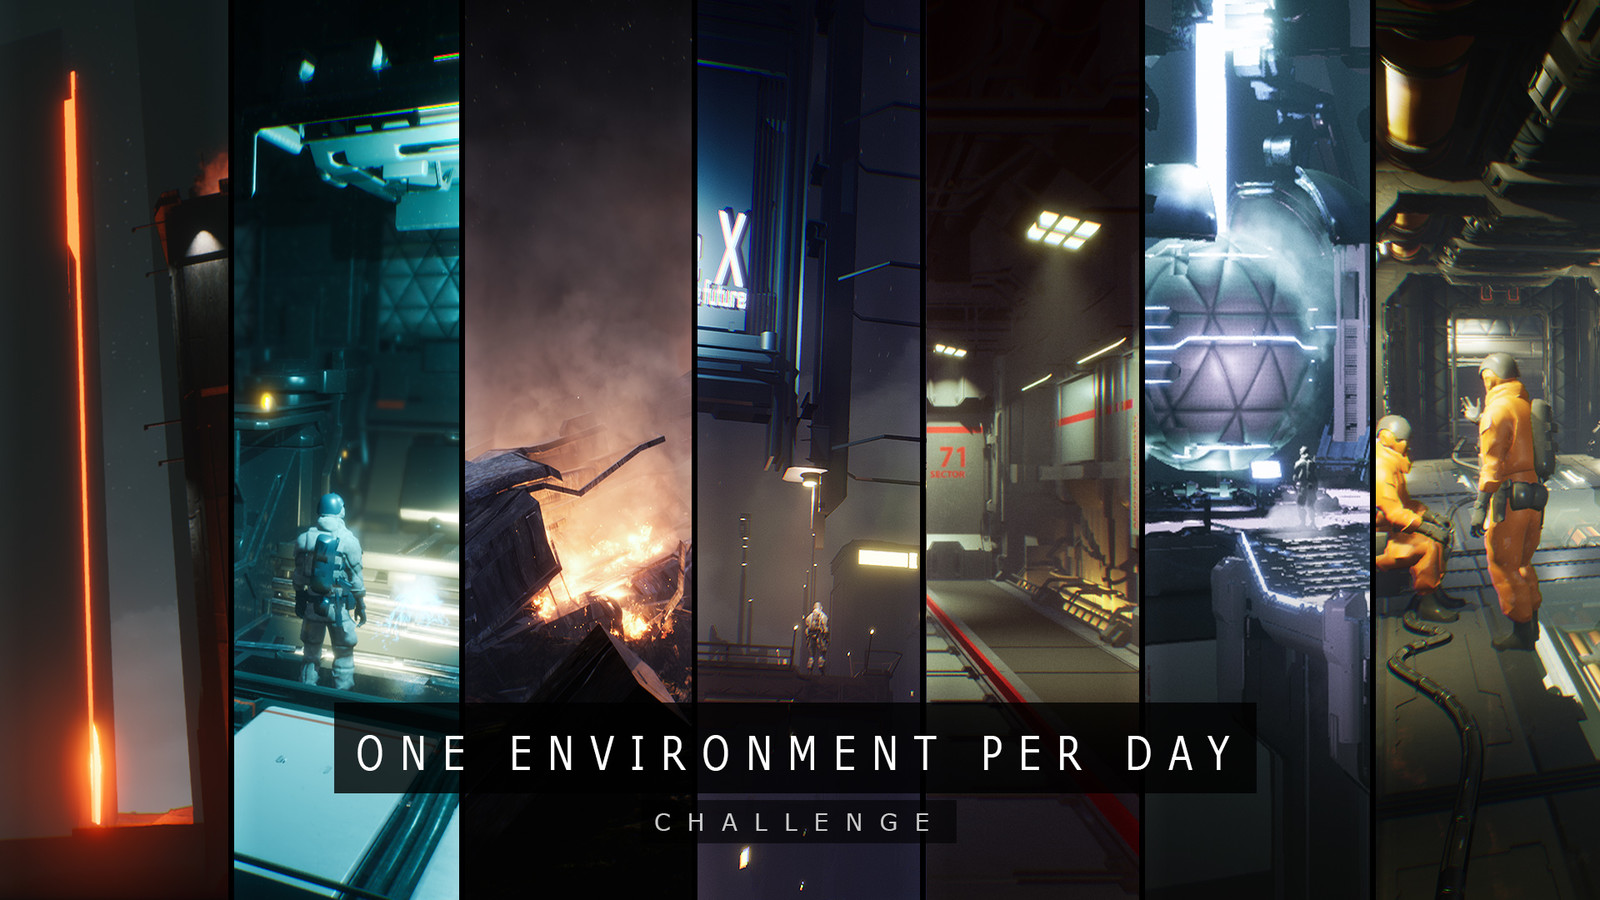 "One environment per day" challenge. 